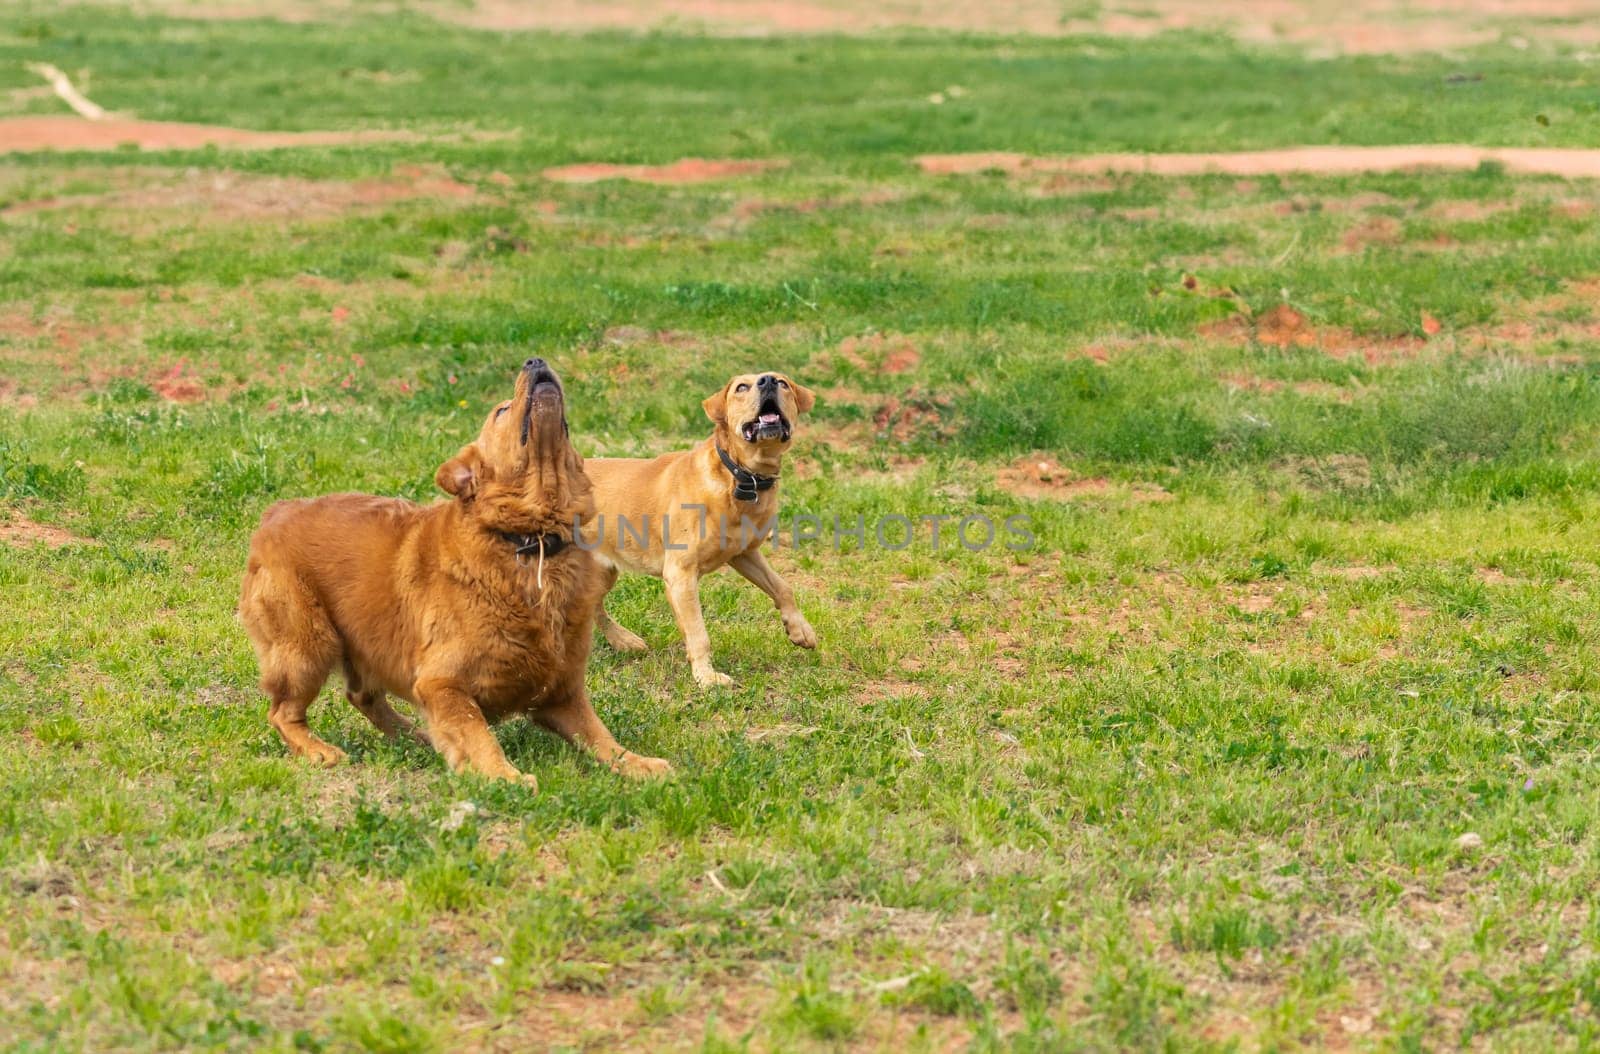 Two dogs are caught mid-action in a grassy expanse one with a reddish coat playfully barks skyward while the other, a tan companion, looks on with an open mouth, echoing the call.